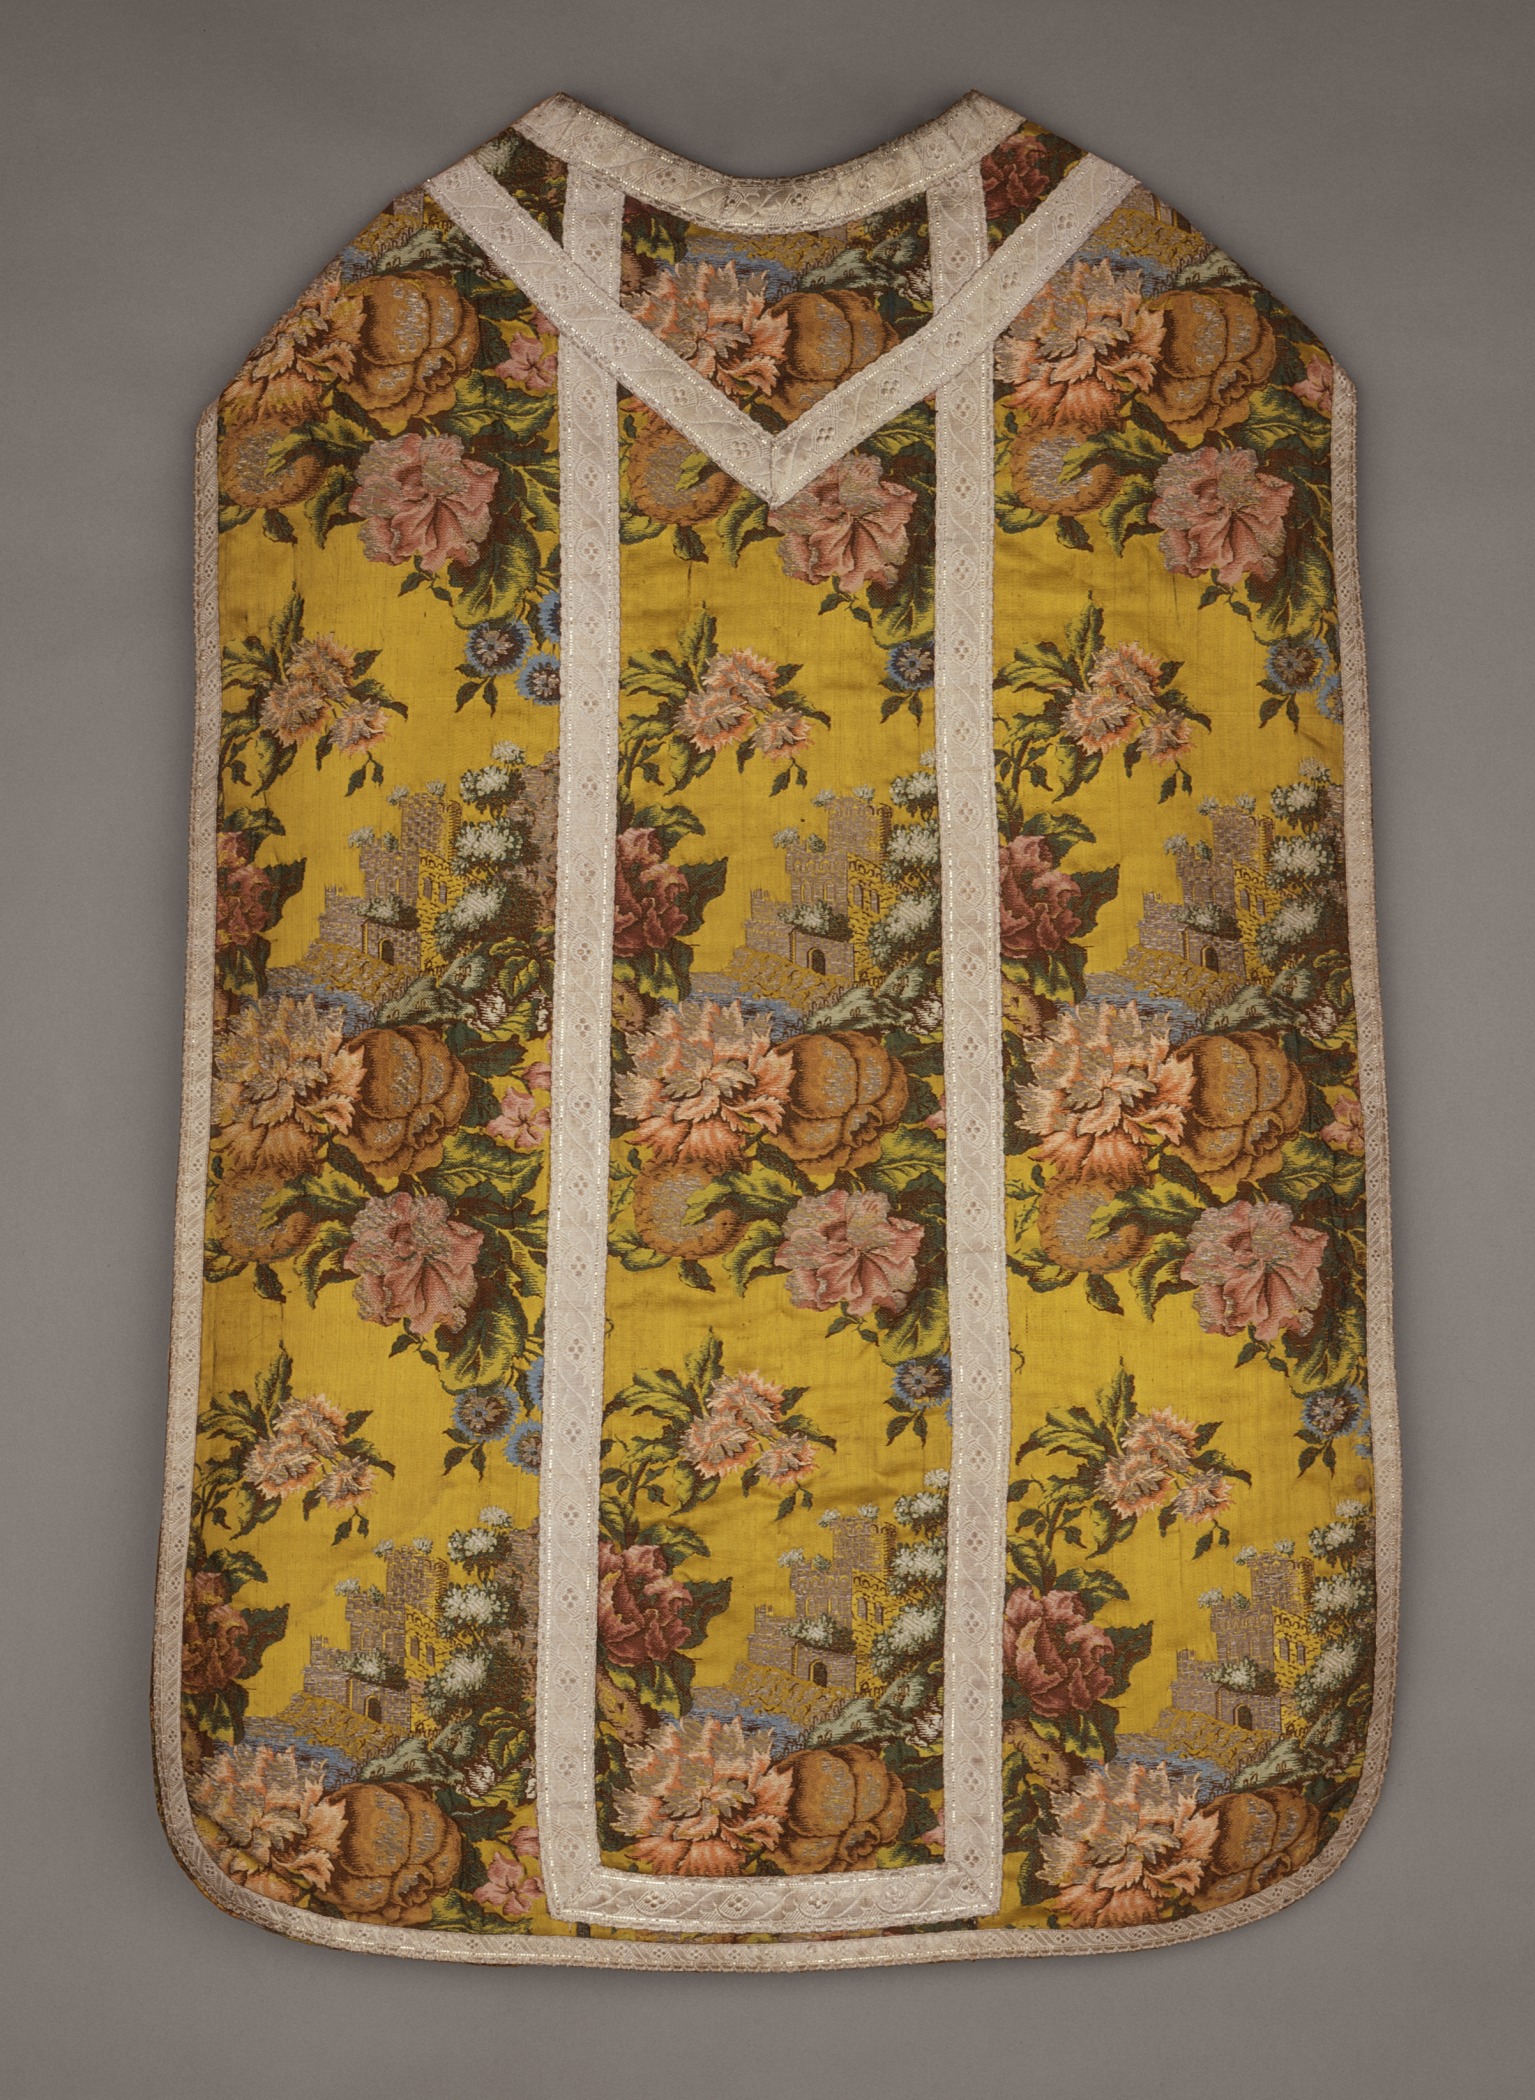  Eighteenth-century chasuble with floral embroidery. Image via WikiCommons. 